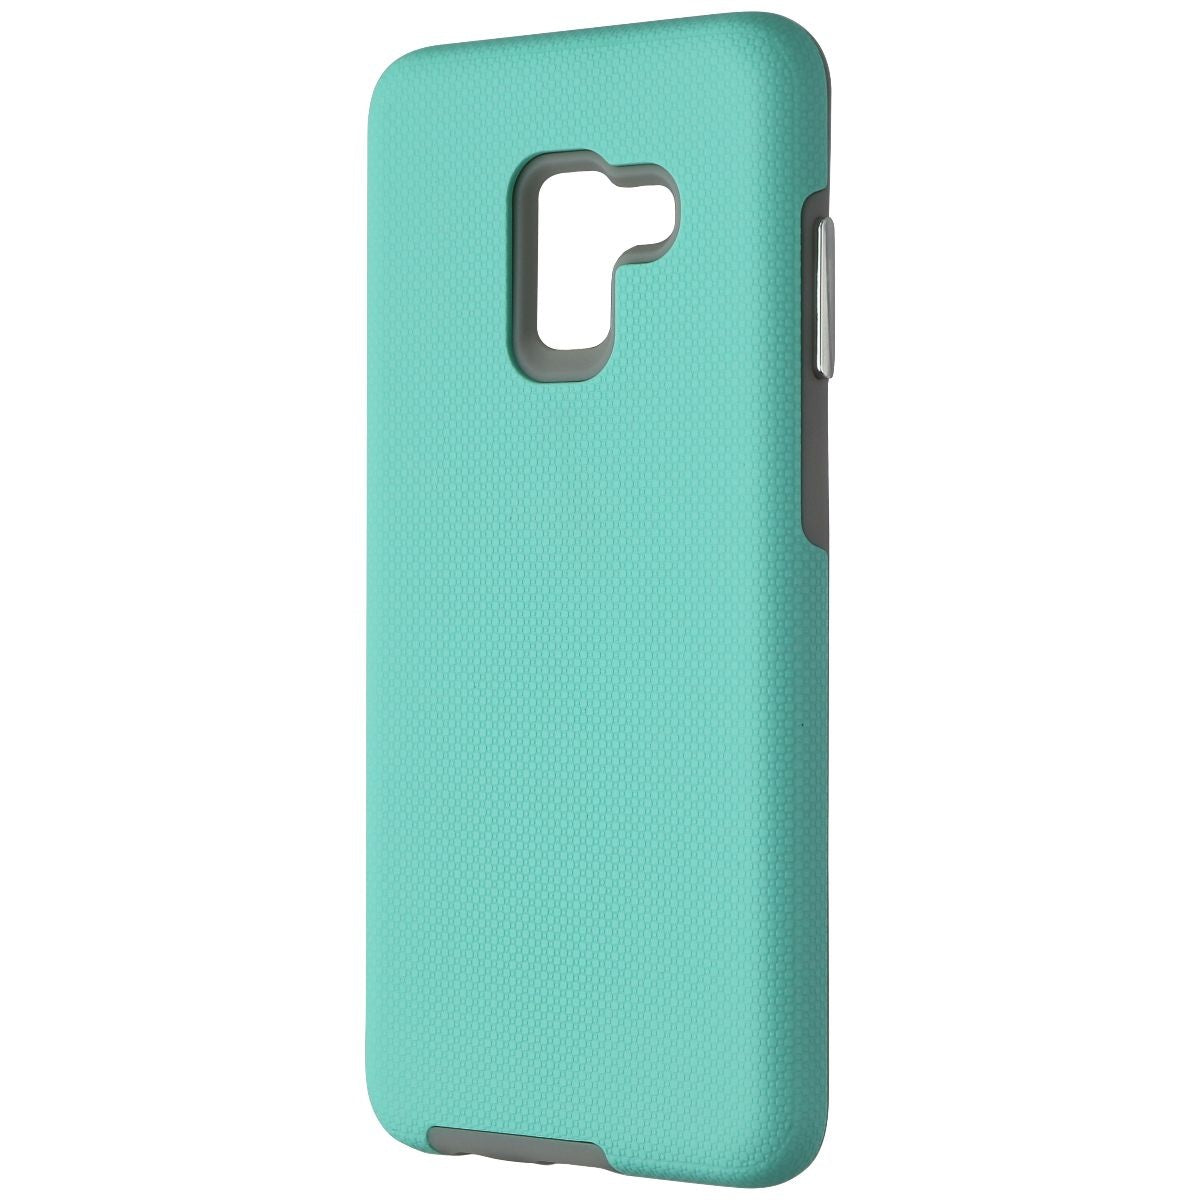 Xqisit Protective Cover for Samsung Galaxy A8 (2018) Smartphone - Teal/Gray Cell Phone - Cases, Covers & Skins Xqisit    - Simple Cell Bulk Wholesale Pricing - USA Seller